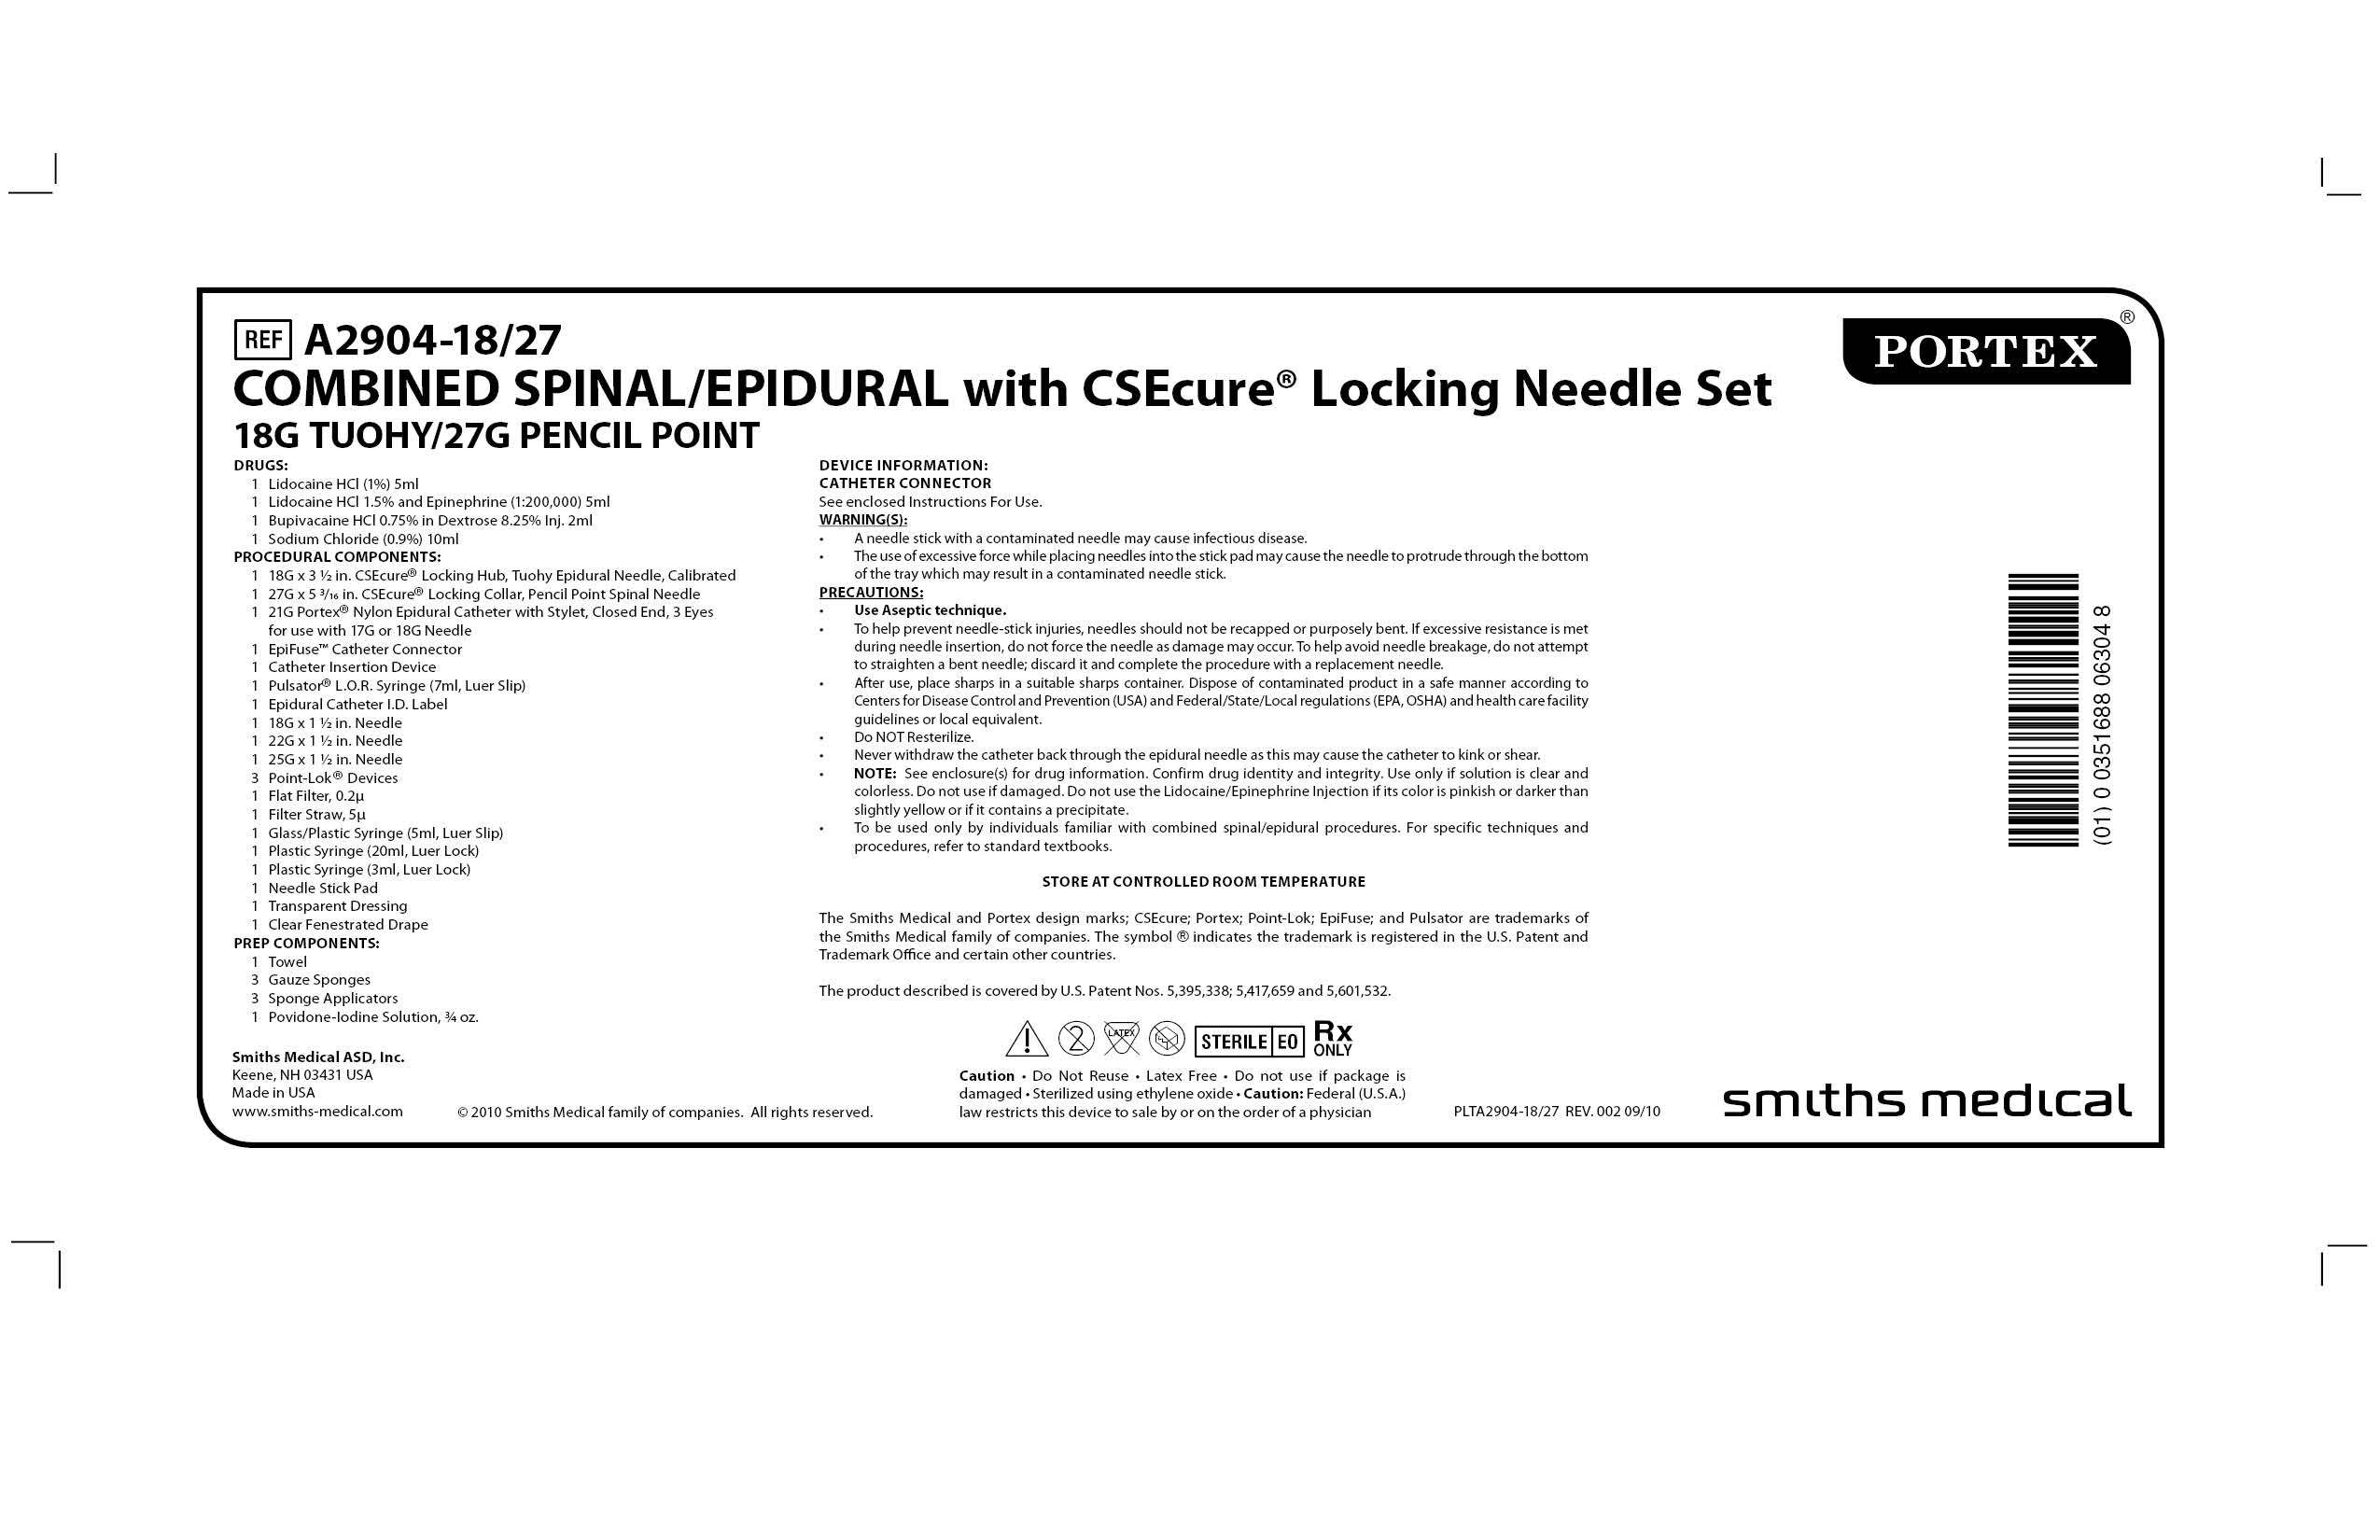 A2904-18/27 COMBINED SPINAL/EPIDURAL with CSEcure Locking Needle Set 18G TUOHY/27G PENCIL POINT